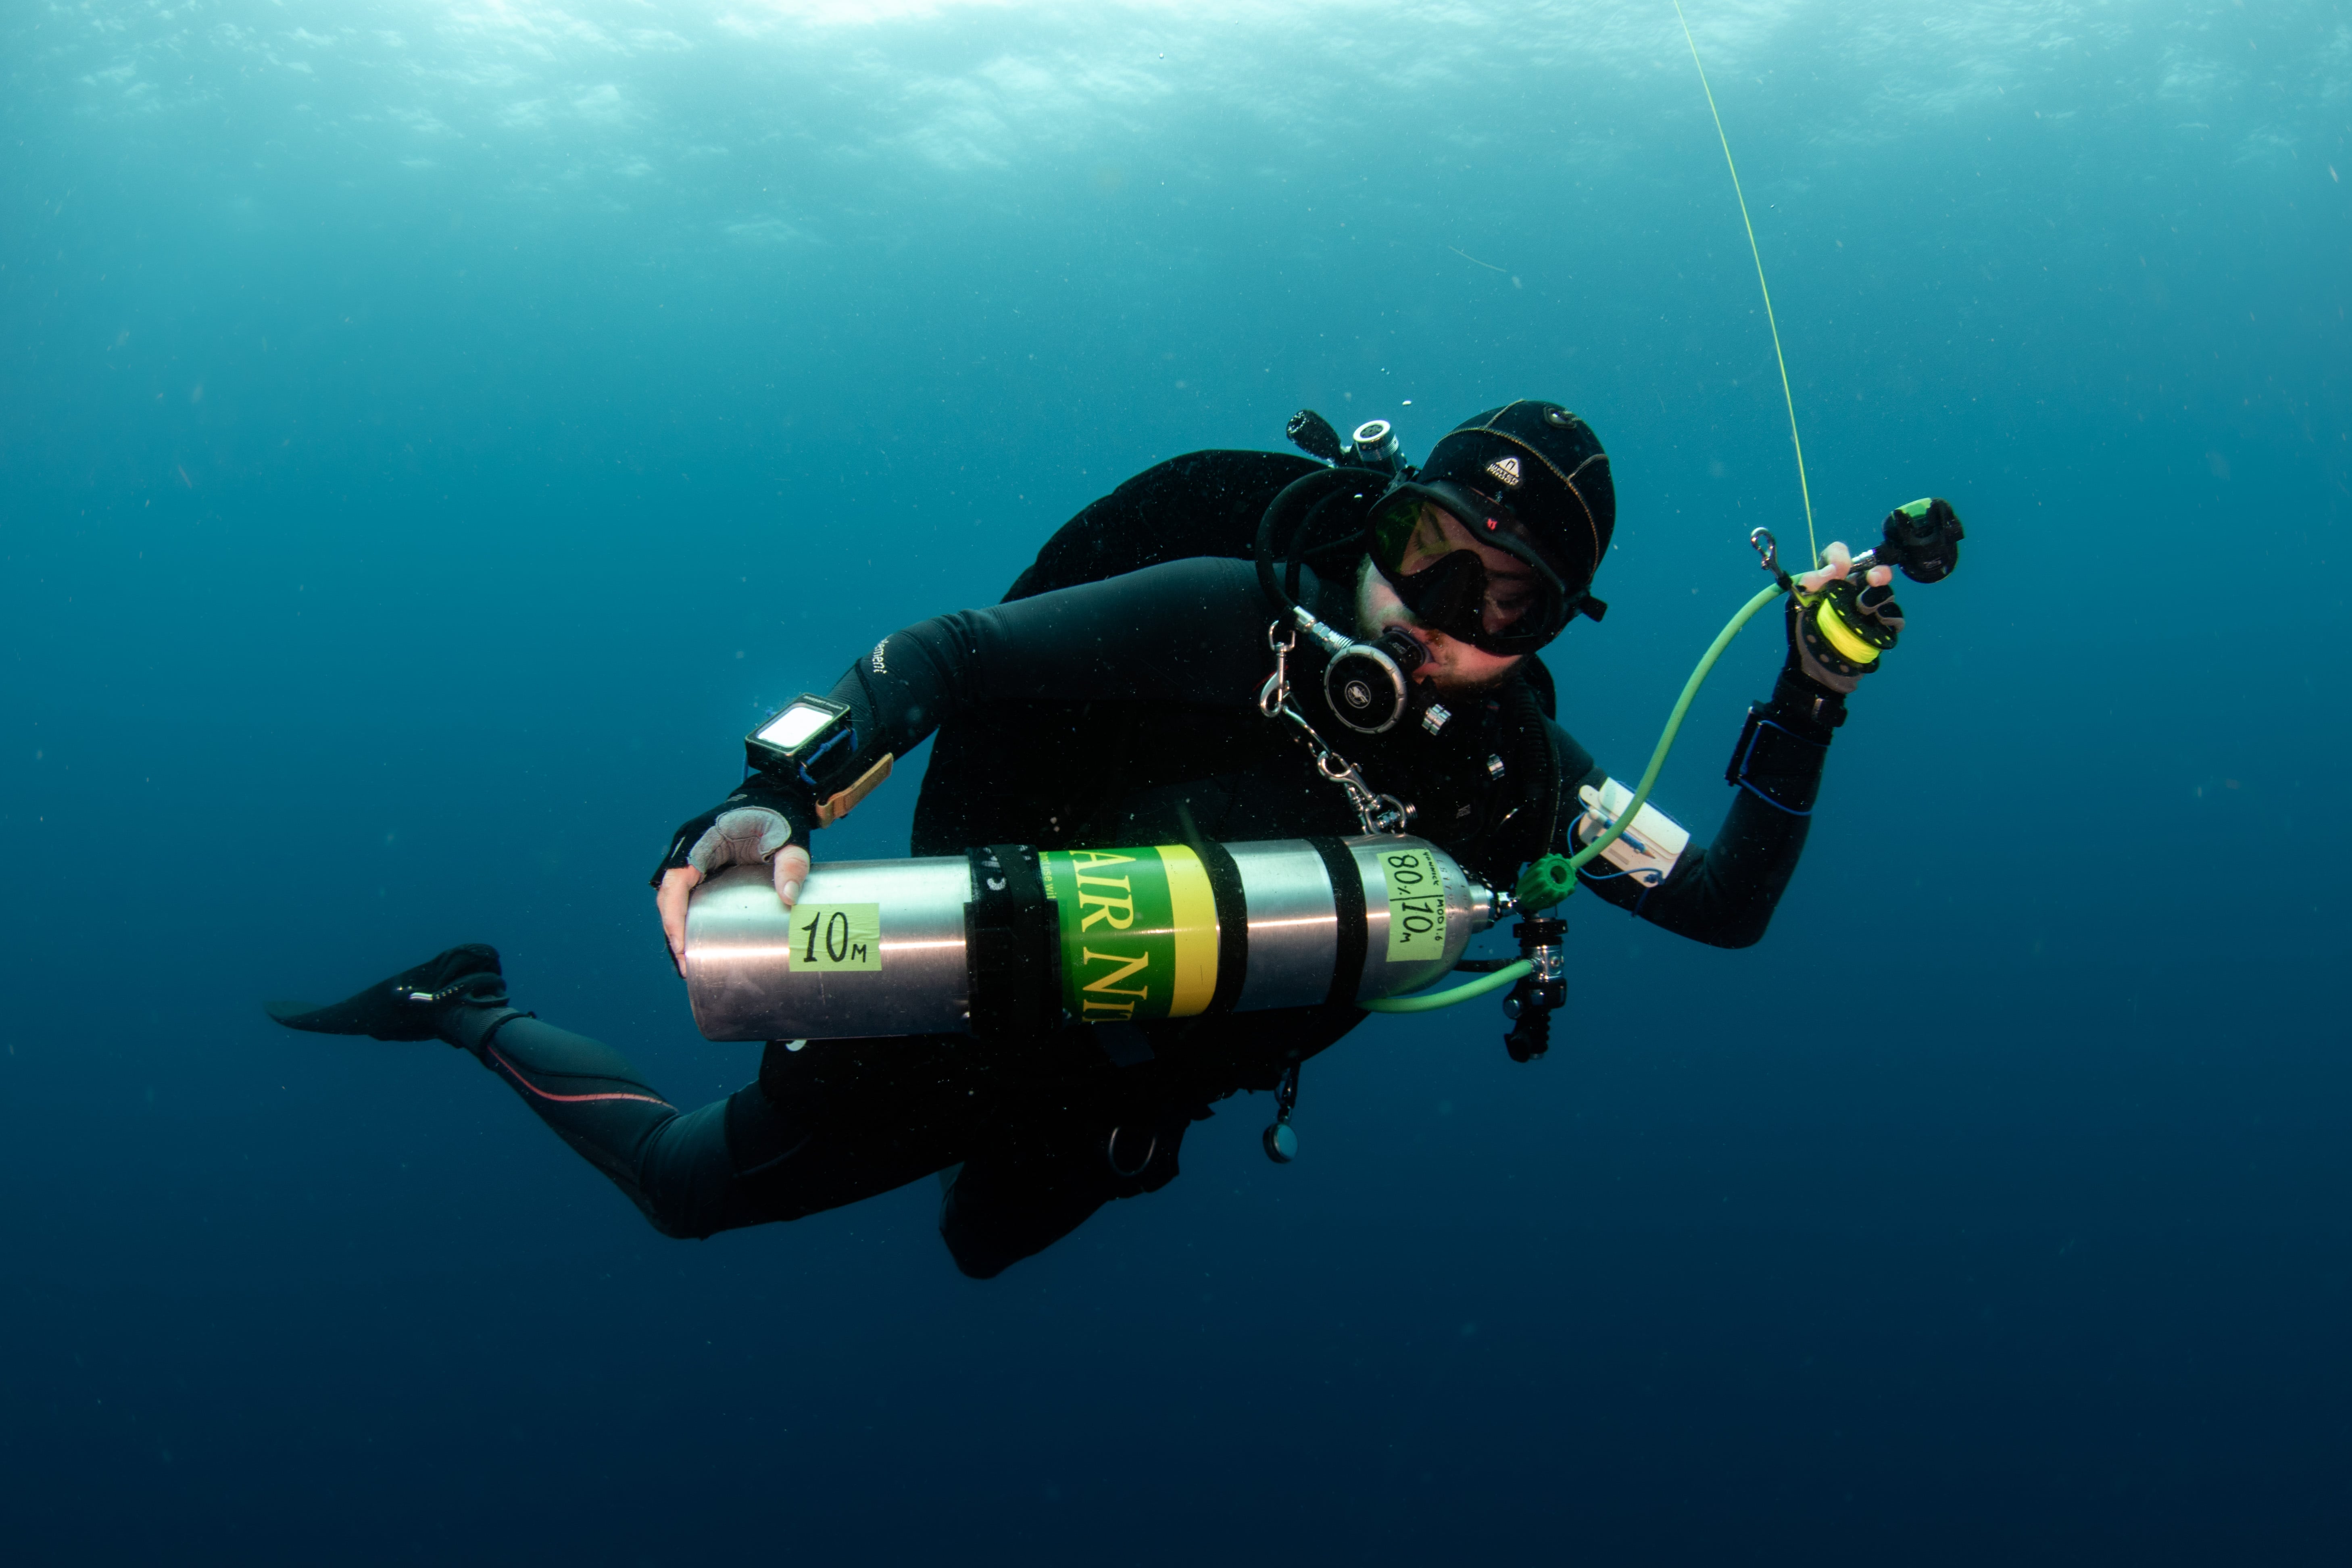 Yannick showing high percentage oxygen stage cilinder during technical dive